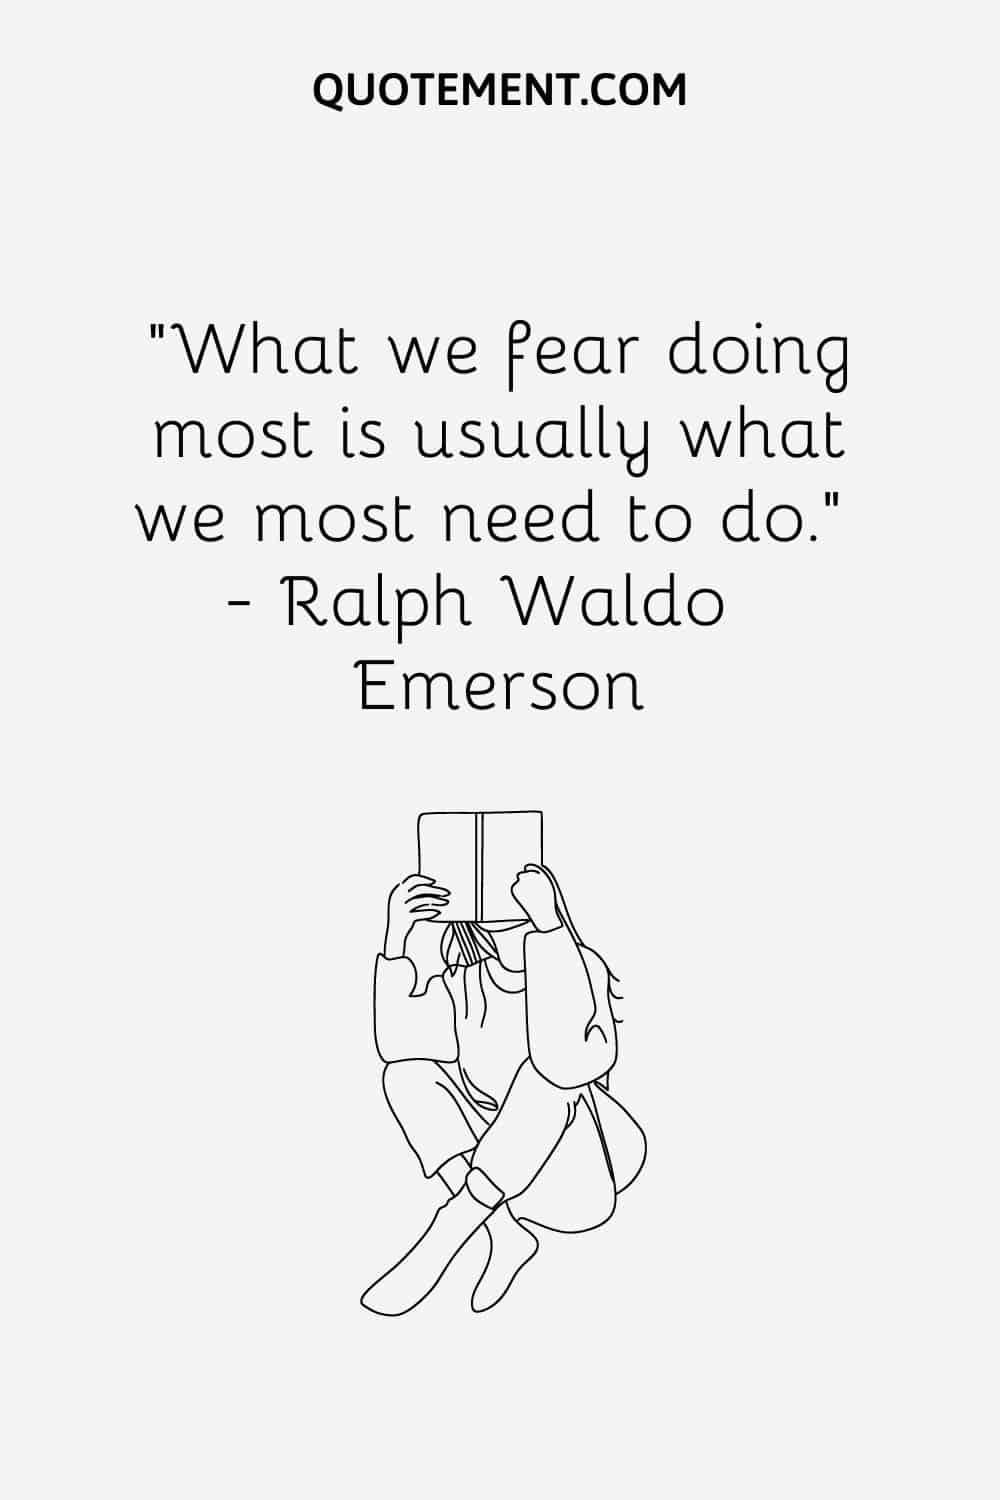 What we fear doing most is usually what we most need to do